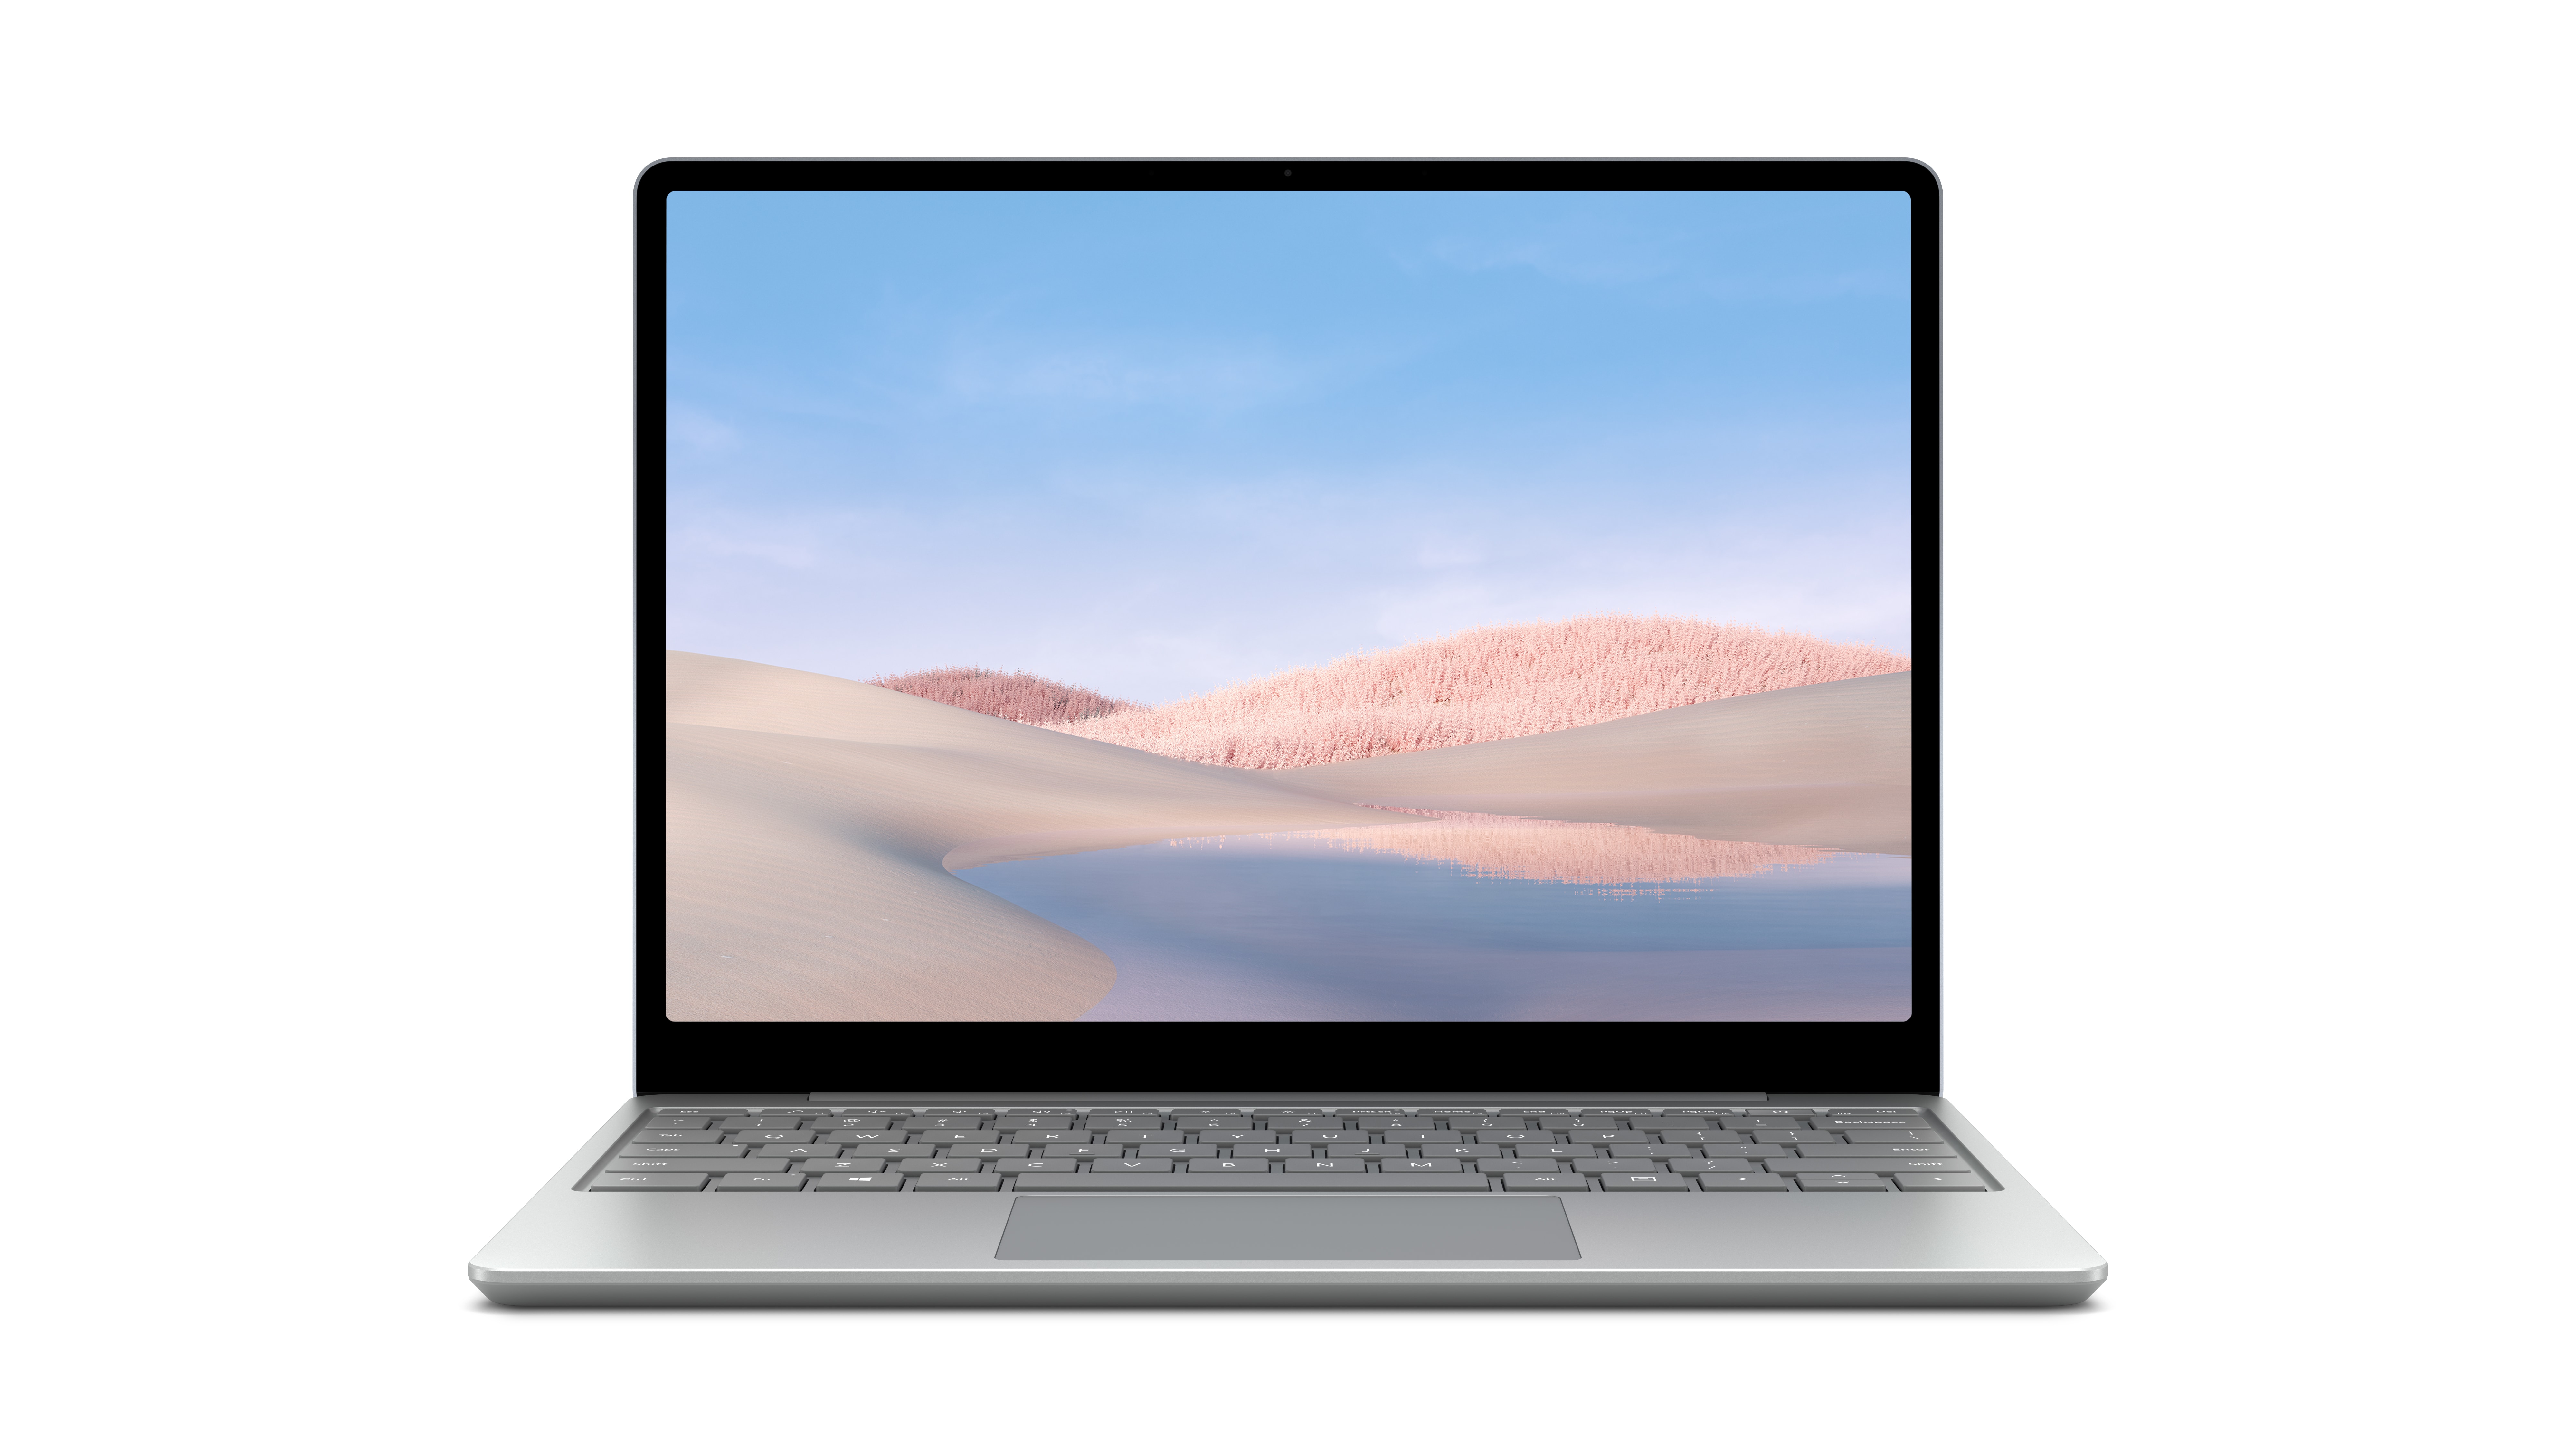 Microsoft Surface Laptop Go, 12.4" Touchscreen, Intel Core i5-1035G1, 8GB Memory, 128GB SSD, Platinum, THH-00001 - image 4 of 7